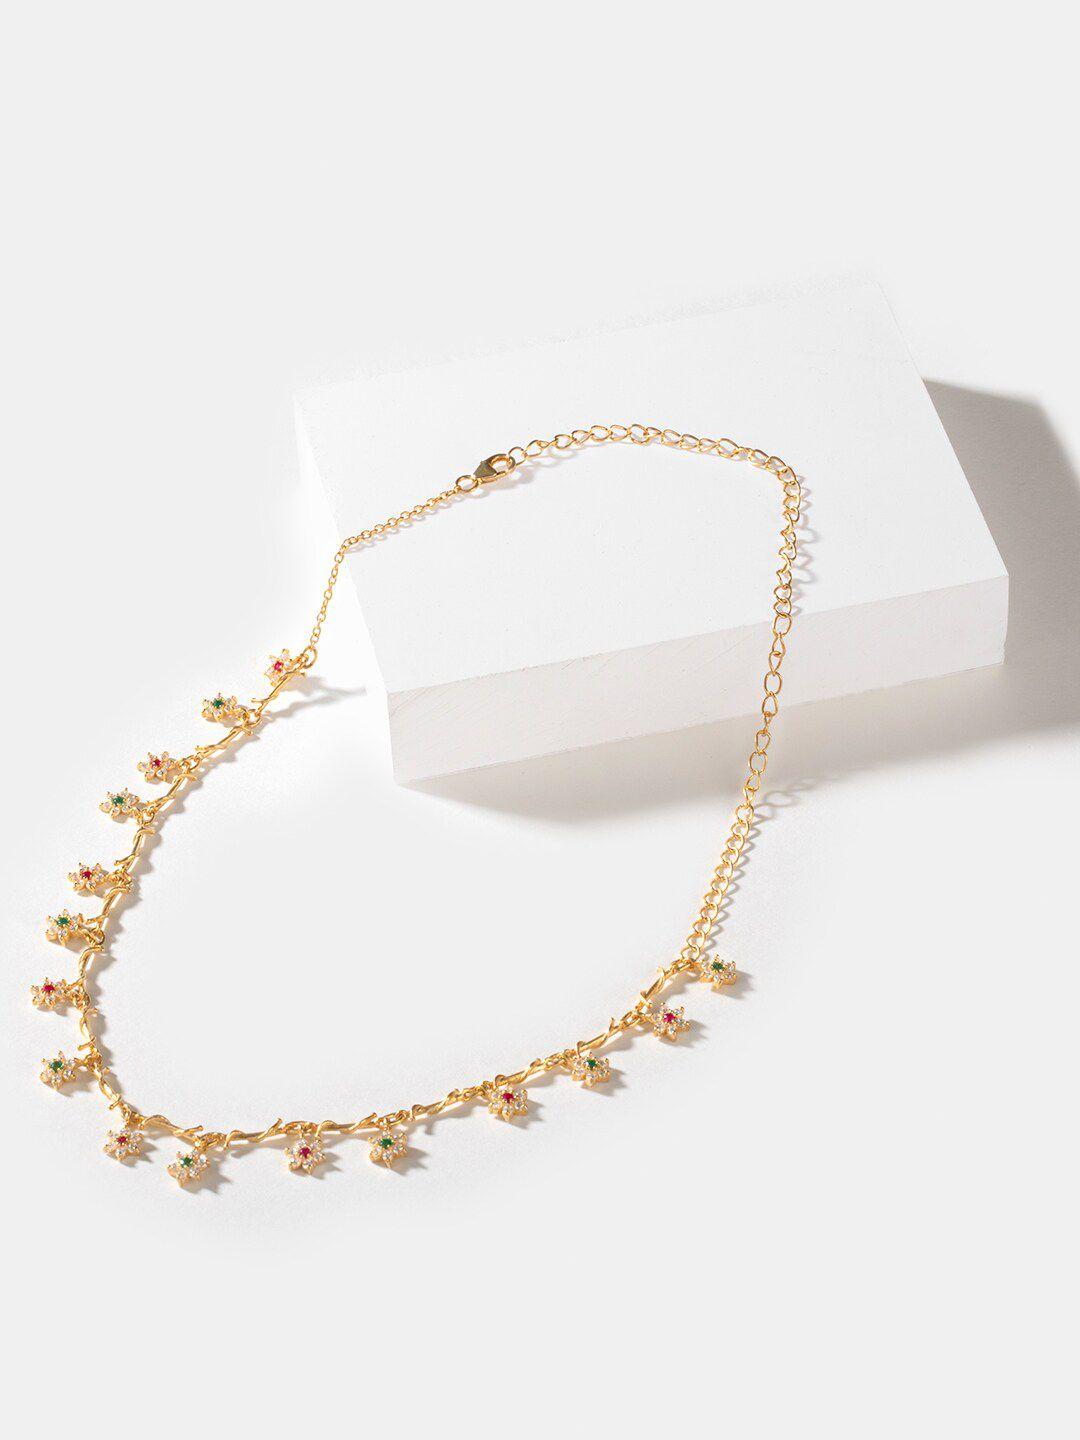 shaya women gold necklace and chains